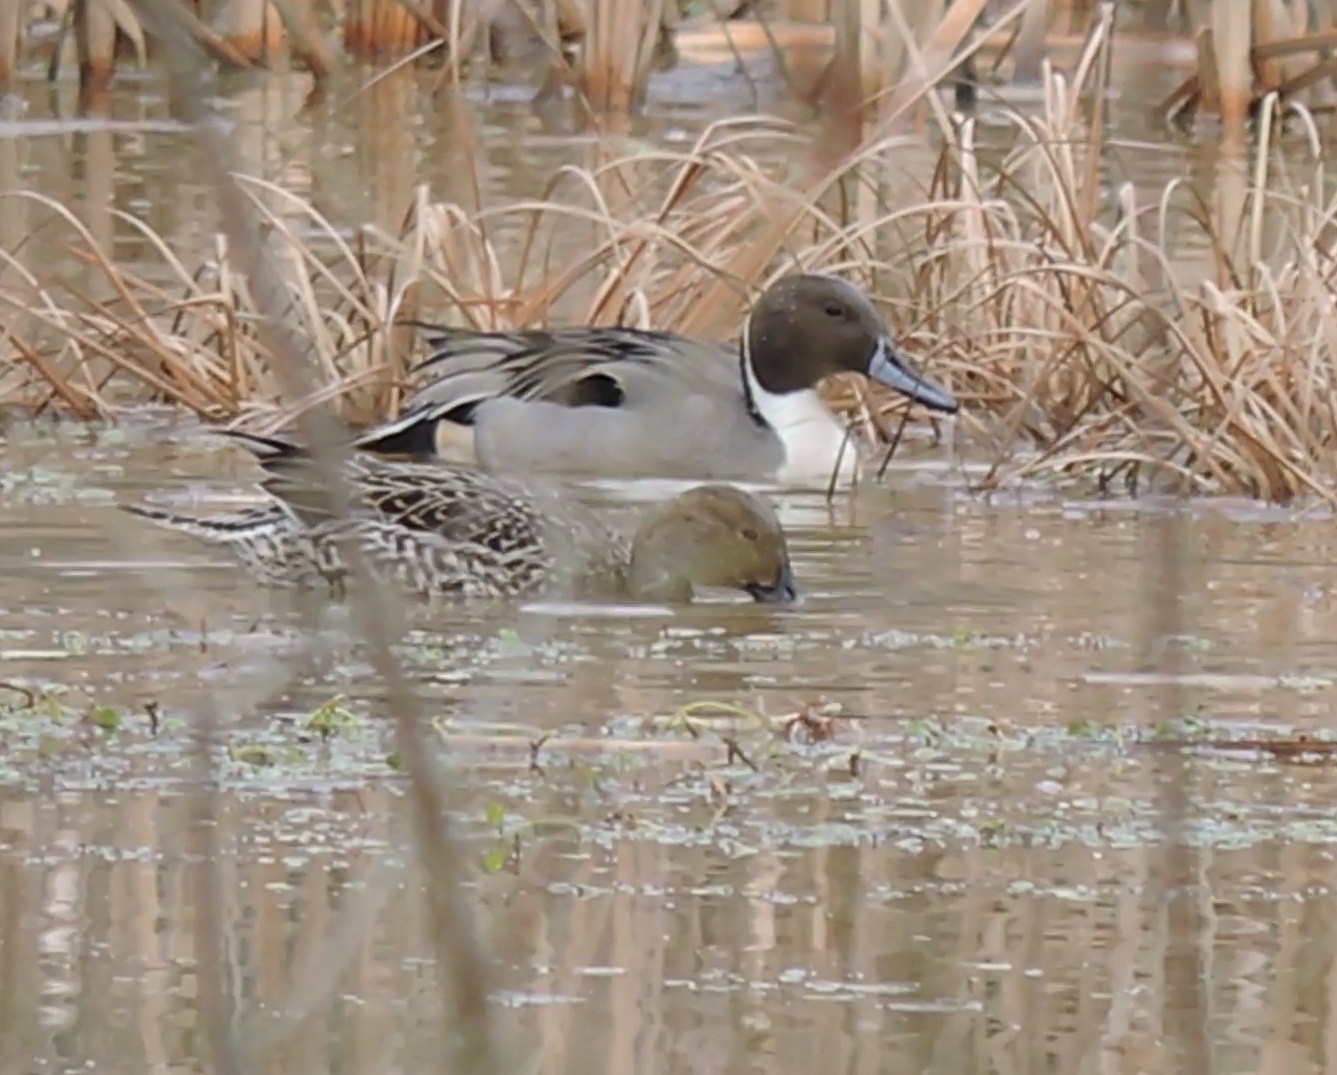 Capital Naturalist by Alonso Abugattas: Northern Pintail